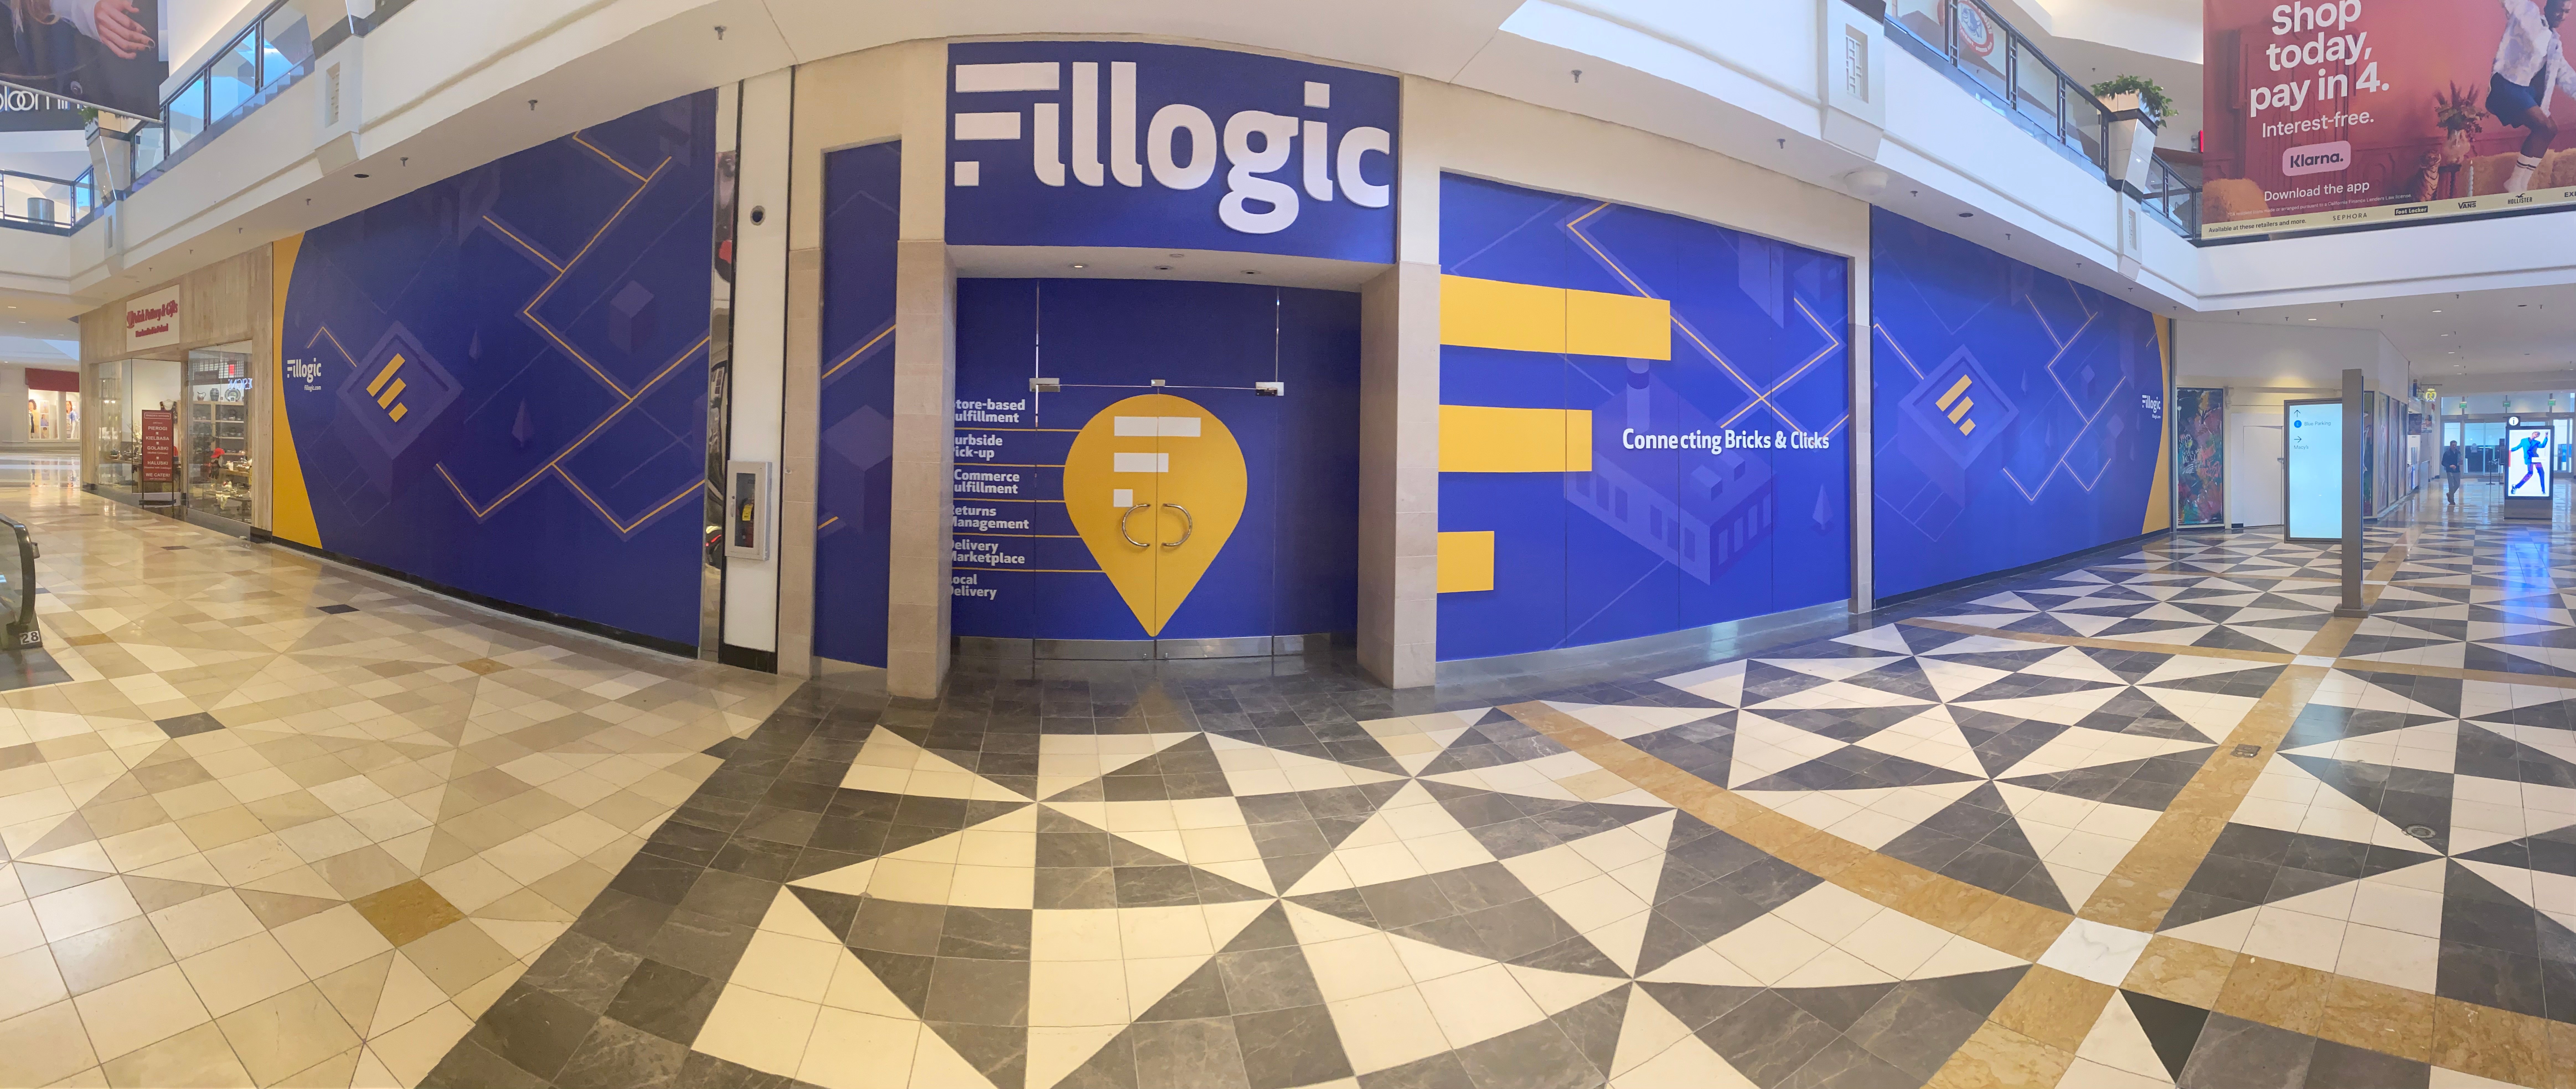 The Fillogic Hub Network of tech-enabled micro distribution hubs, located inside local shopping malls, gives Javy Coffee access to end-to-end logistics in the middle & last mile.